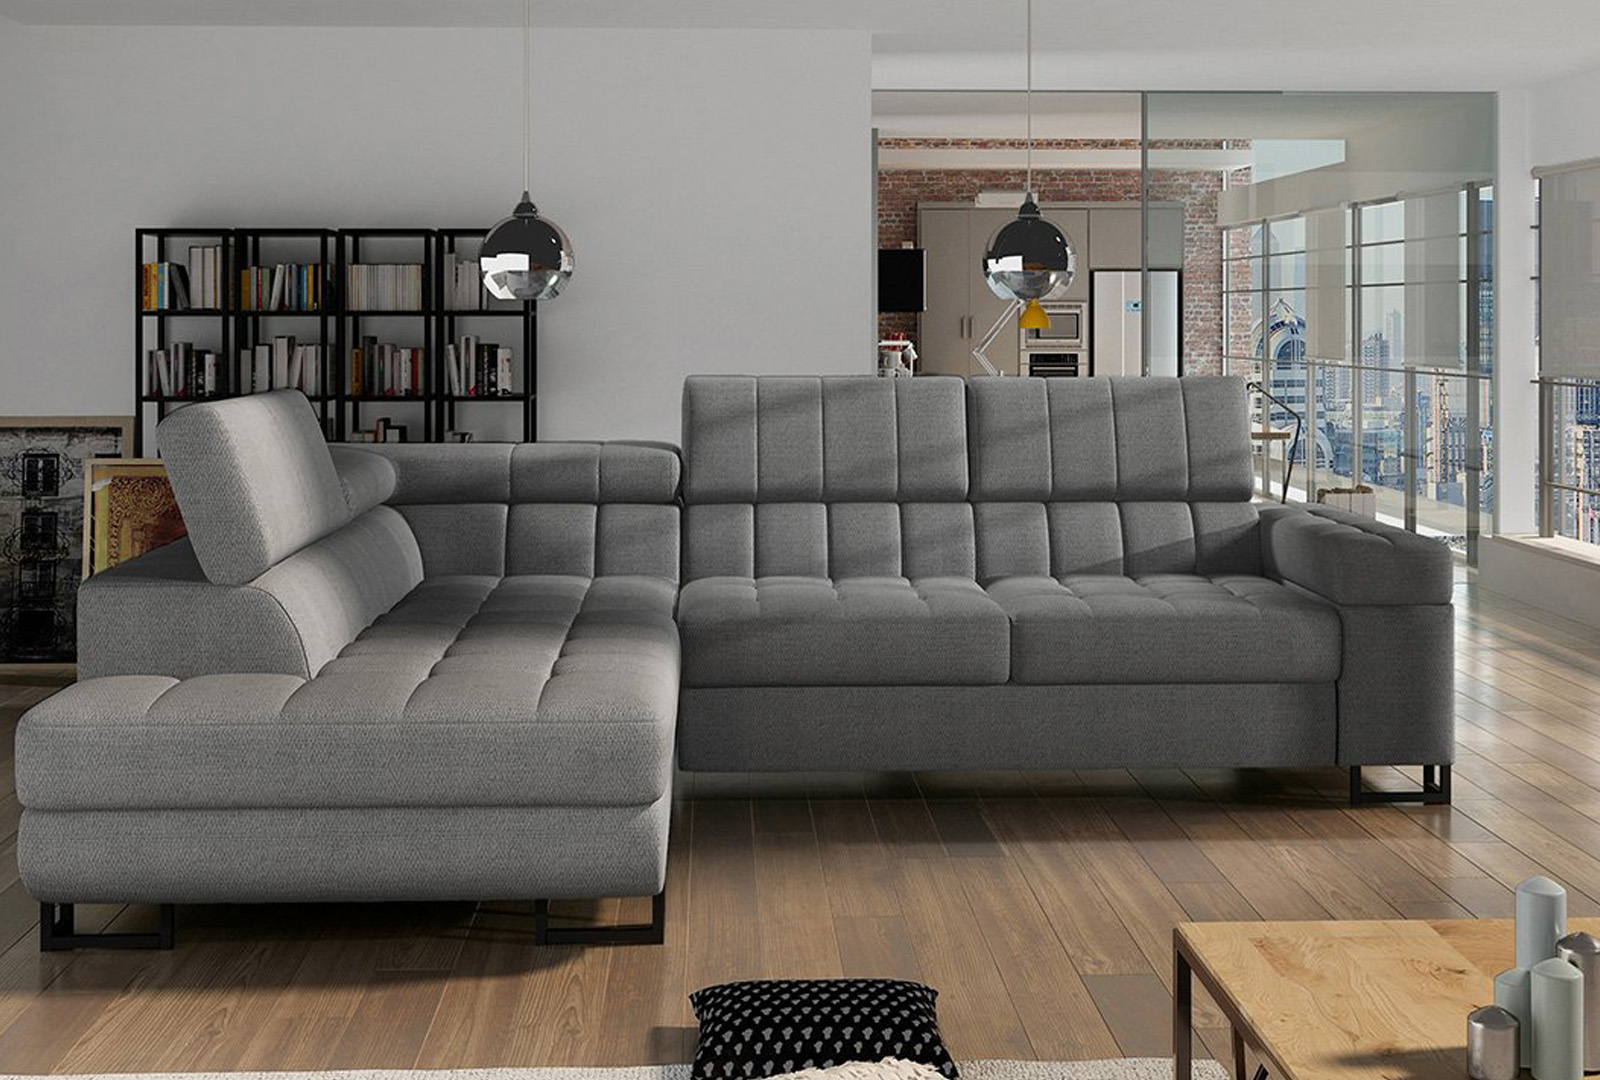 Corner sofa for the Wales living room